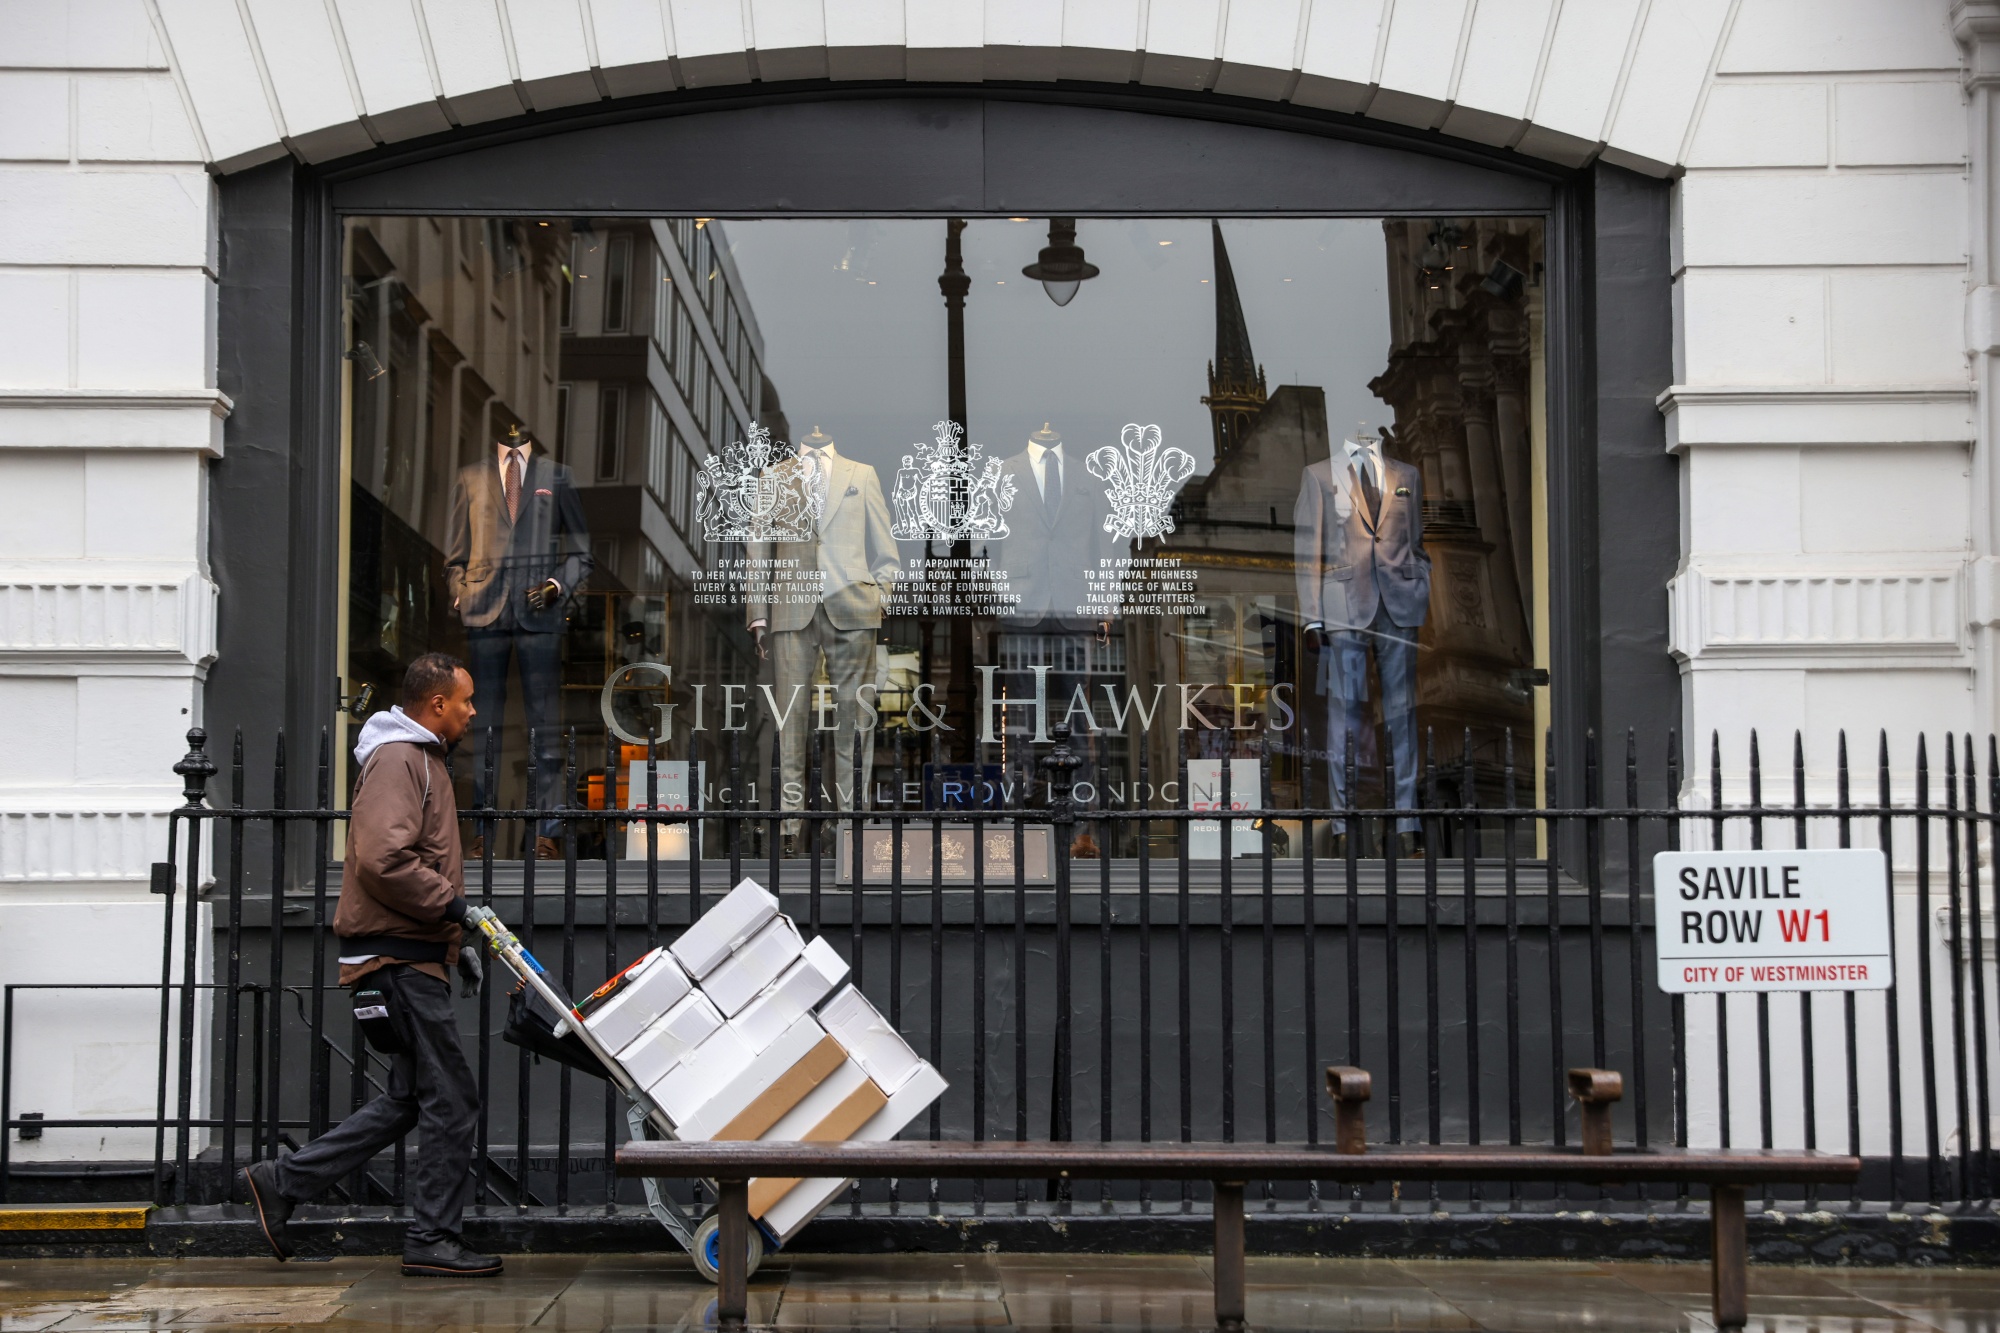 UK Tailor Brand Gieves & Hawkes' Sale Process Said to Kick Off